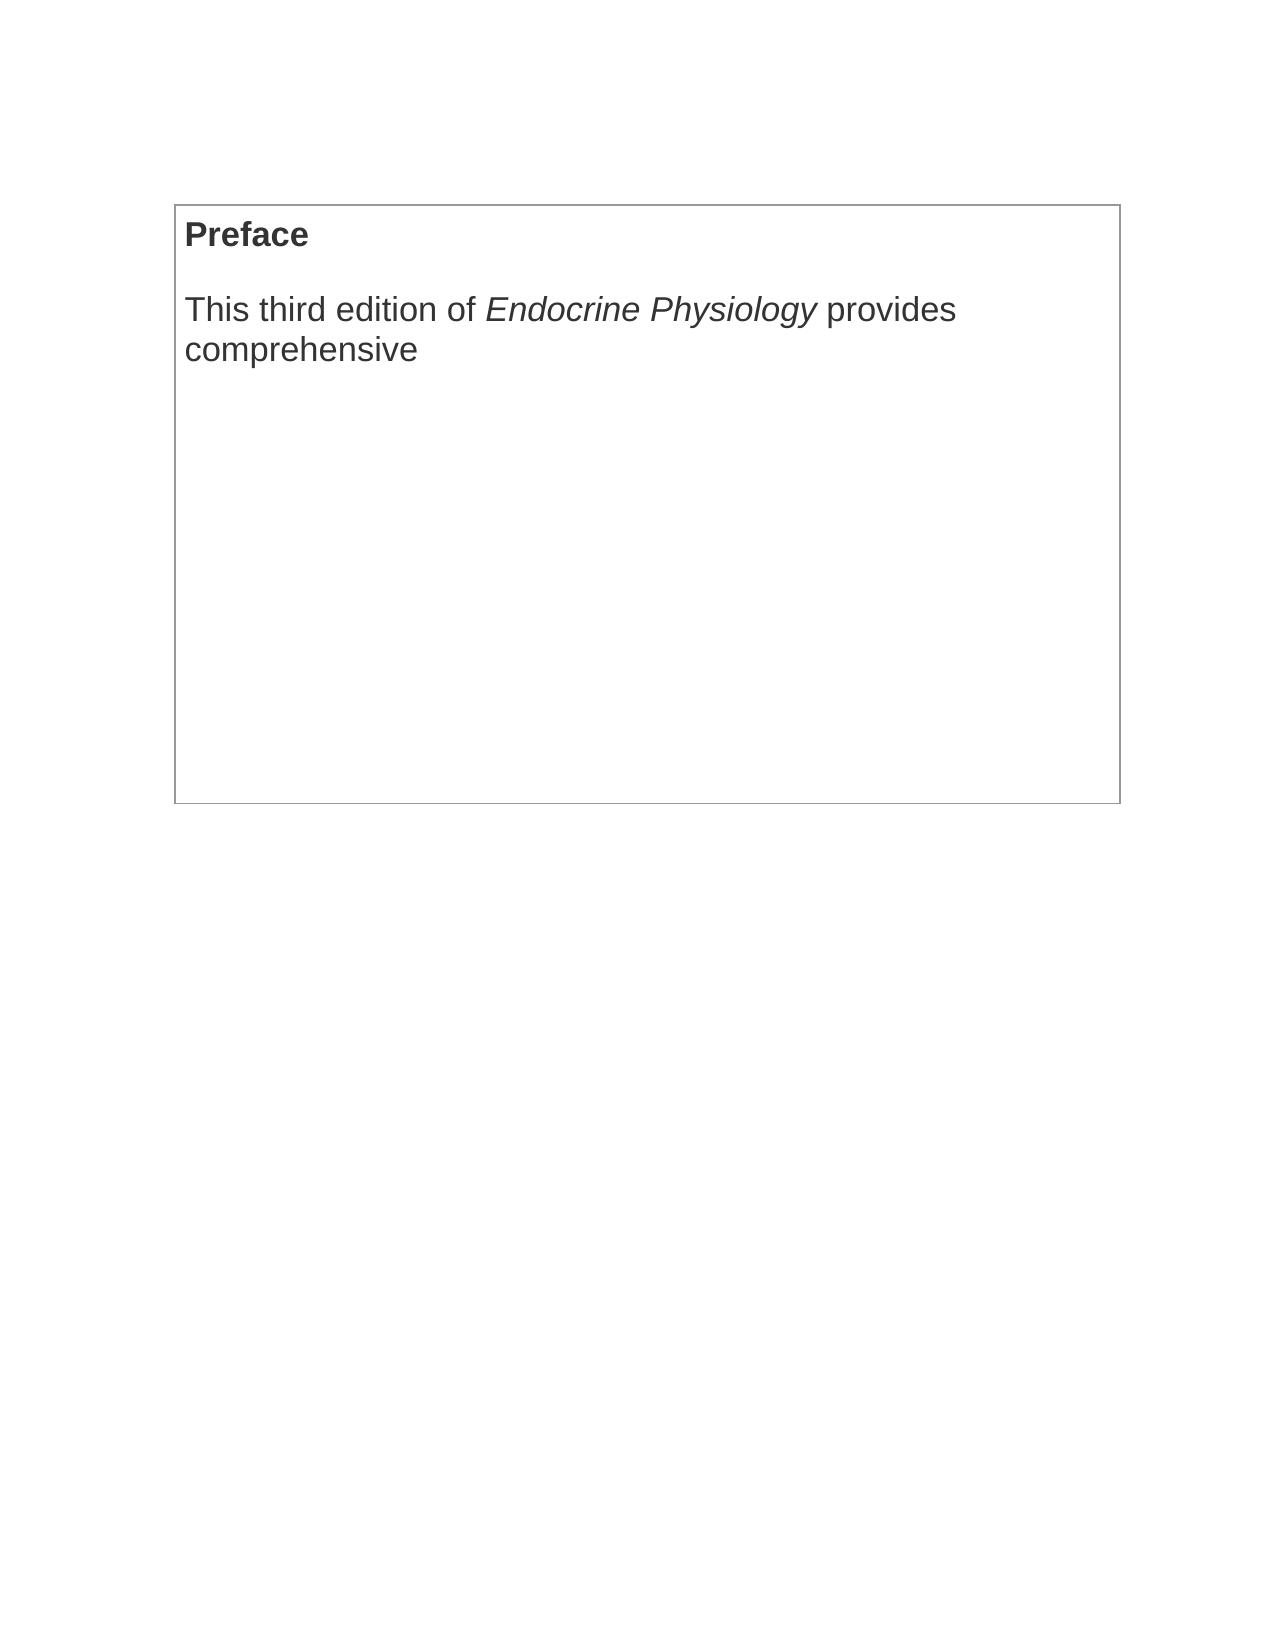 Endocrine Physiology, Third Edition \(LANGE Physiology Series\) - PDFDrive.com